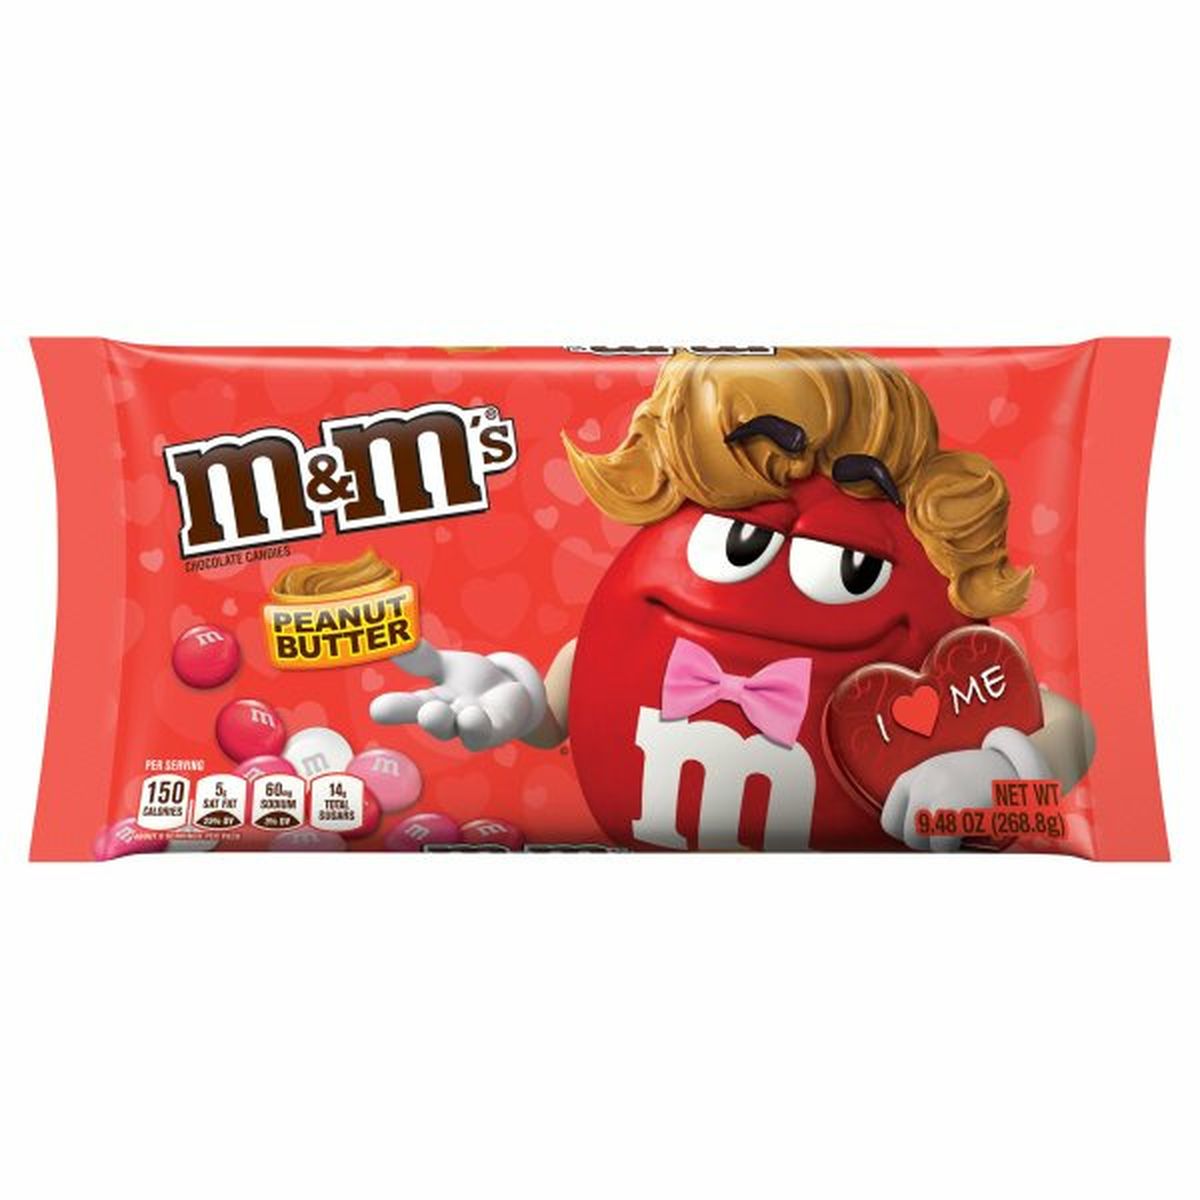 Calories in M&M's Valentine's Peanut Butter Chocolate Candy Bag